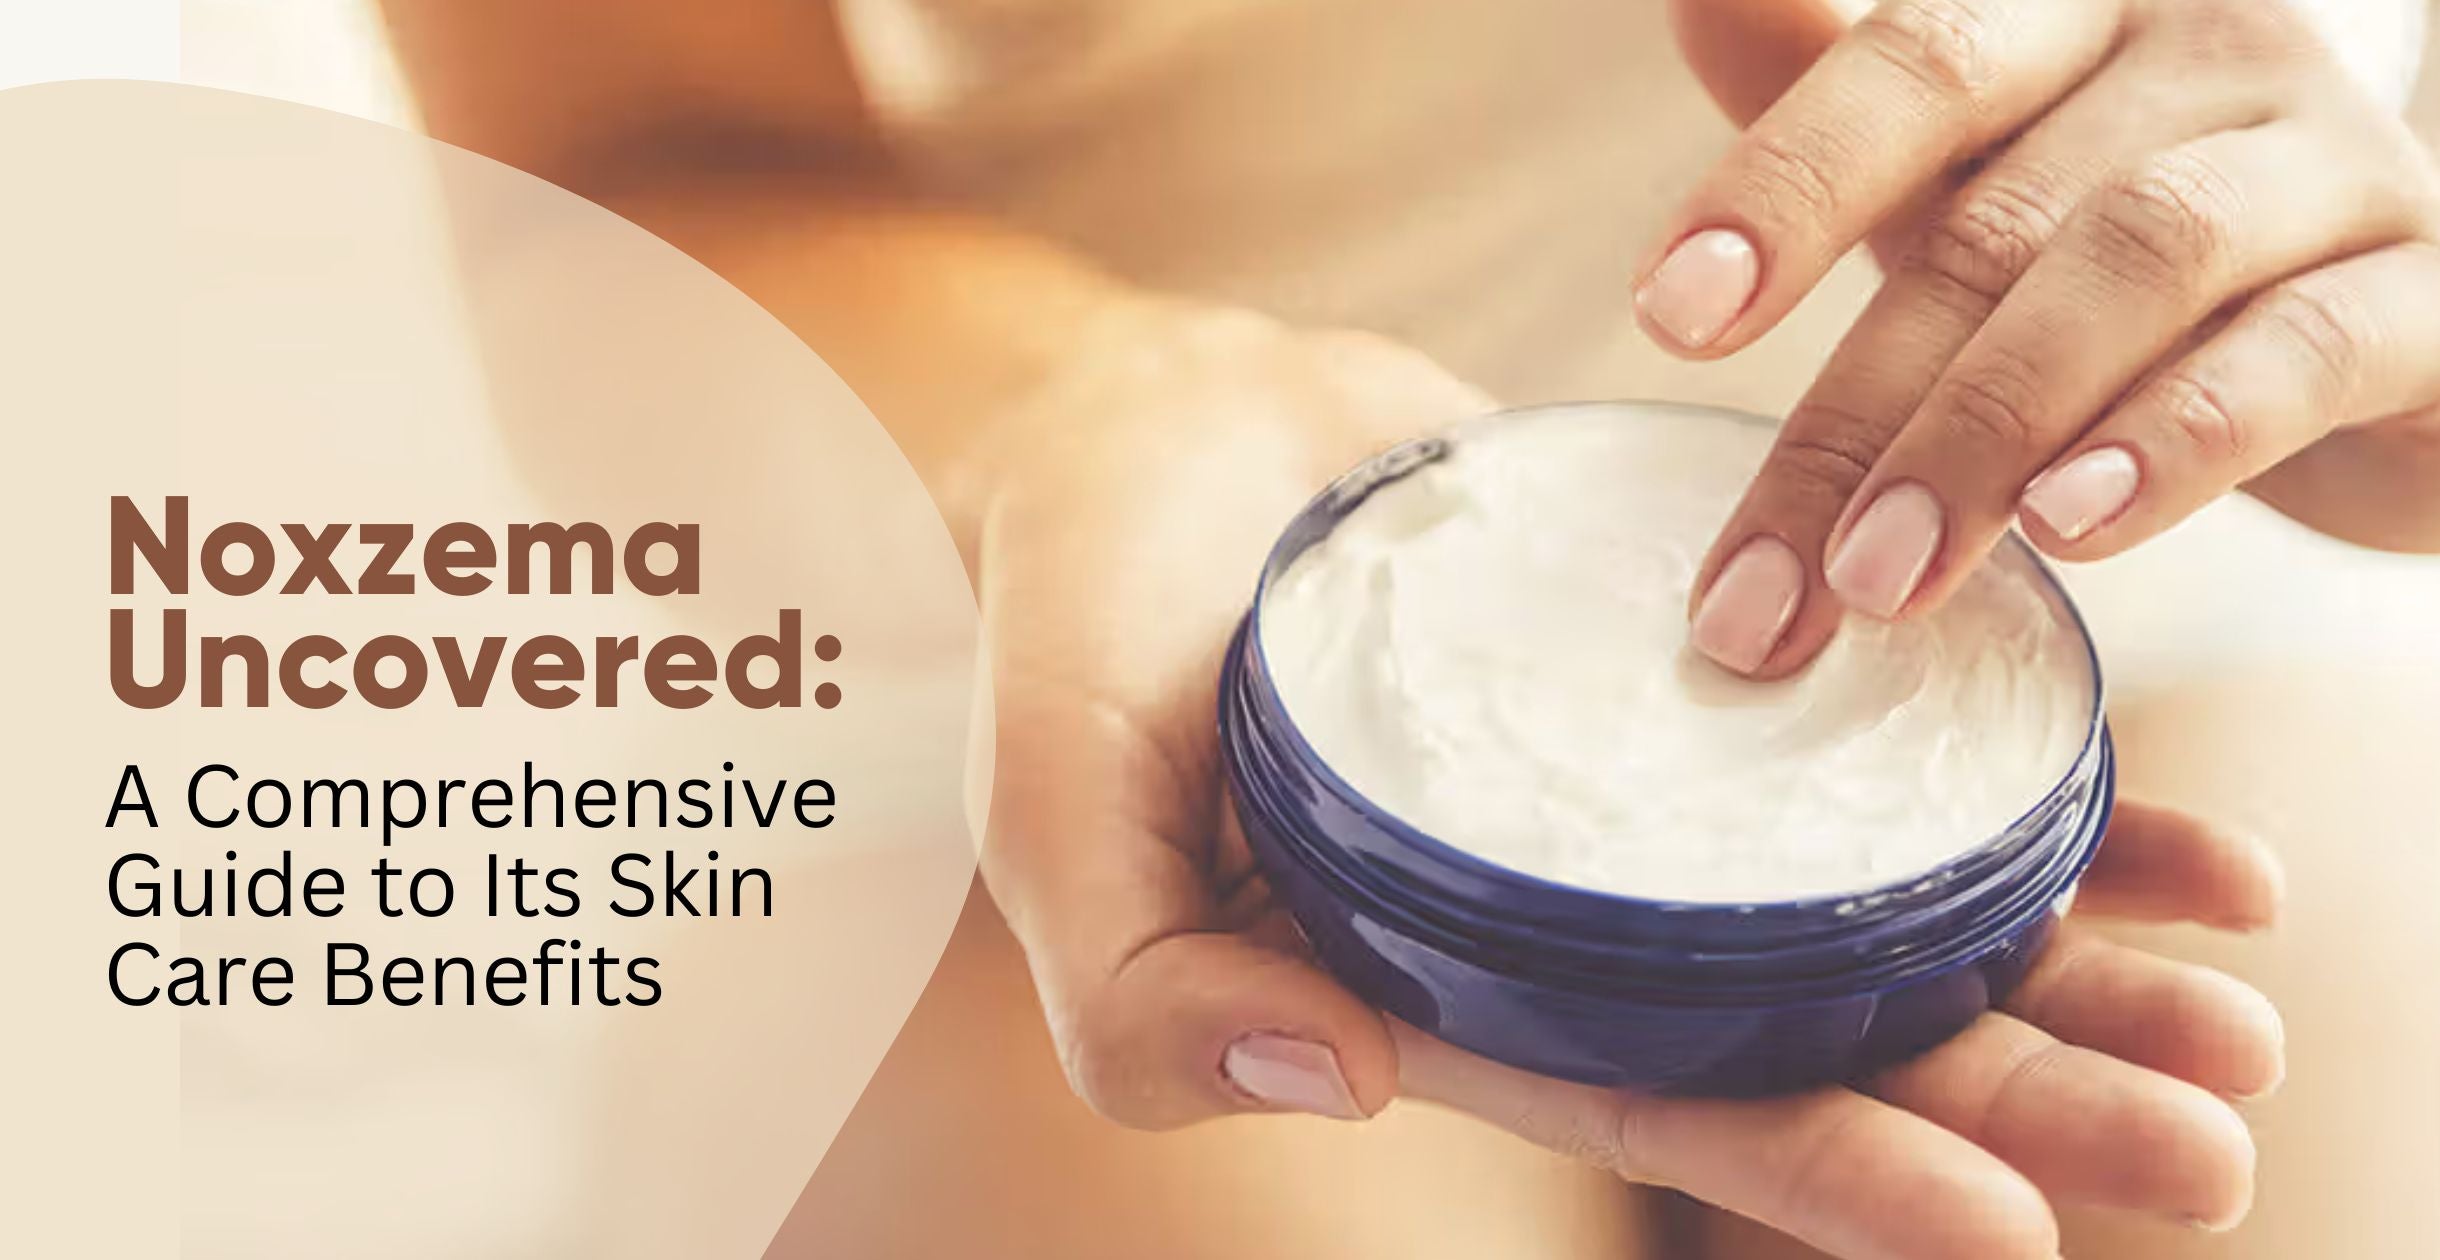 Noxzema Uncovered: A Comprehensive Guide to Its Skin Care Benefits